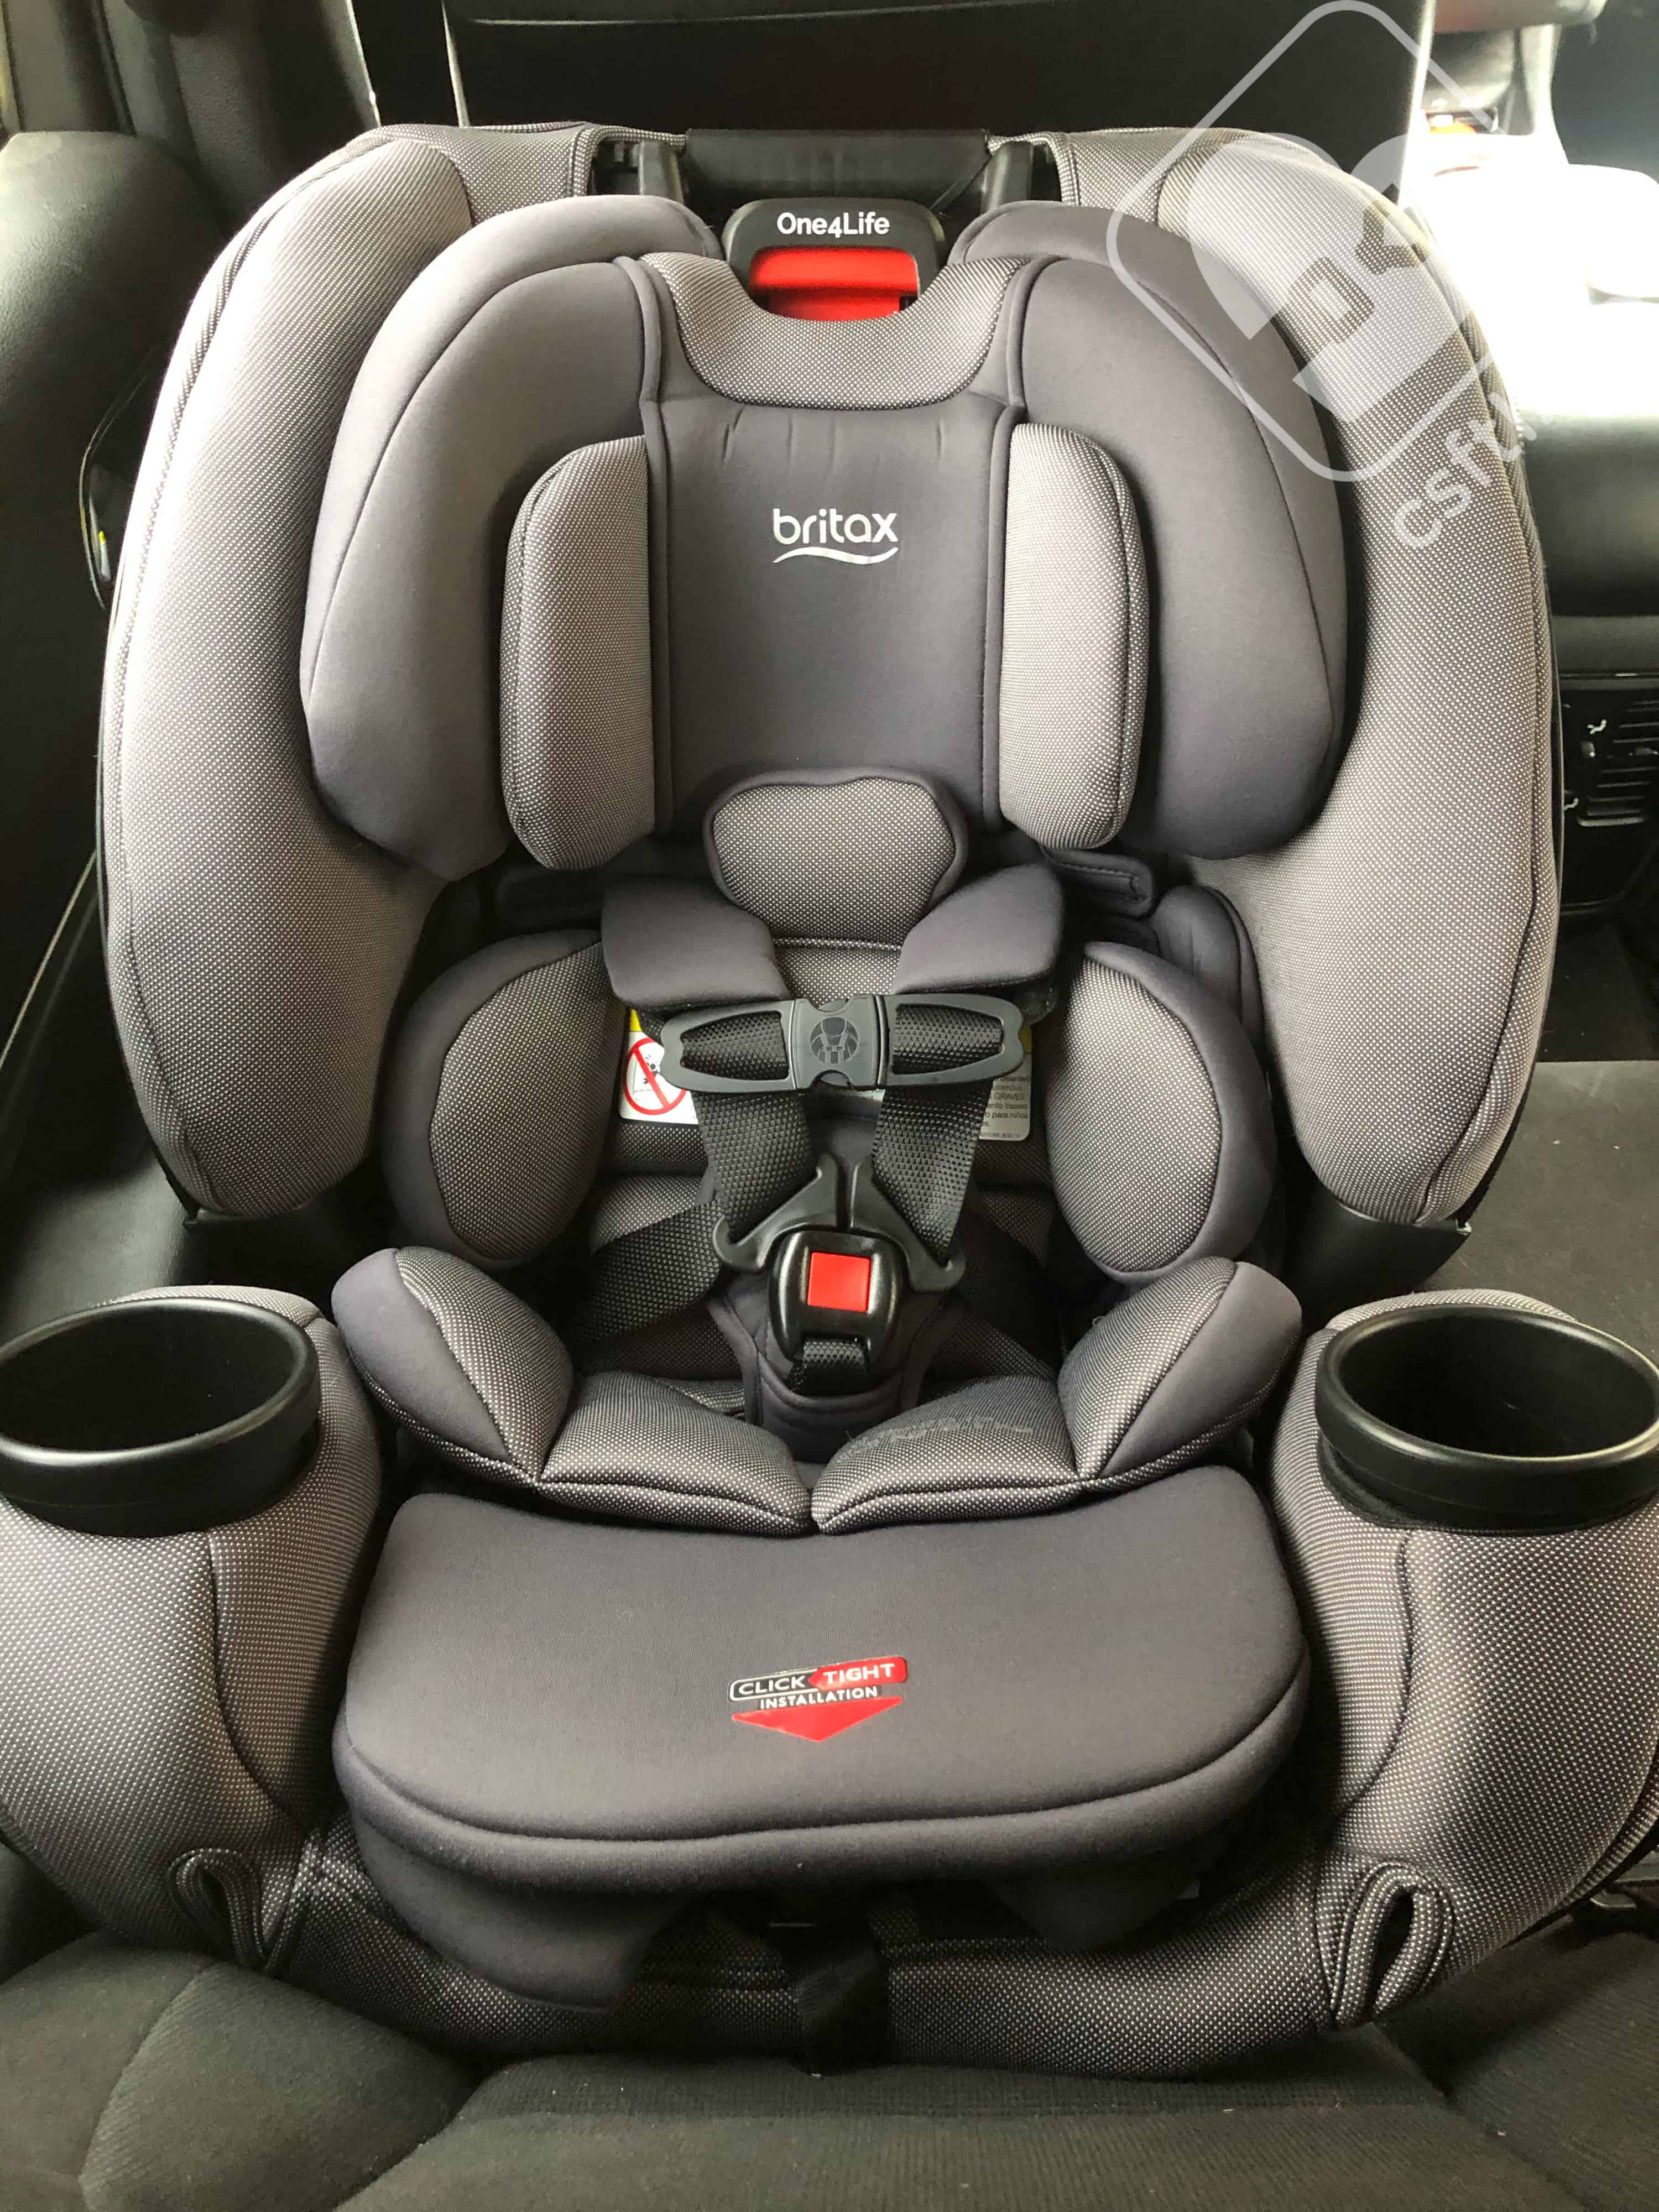 Britax One4life Review United States, How Long To Britax Car Seats Last